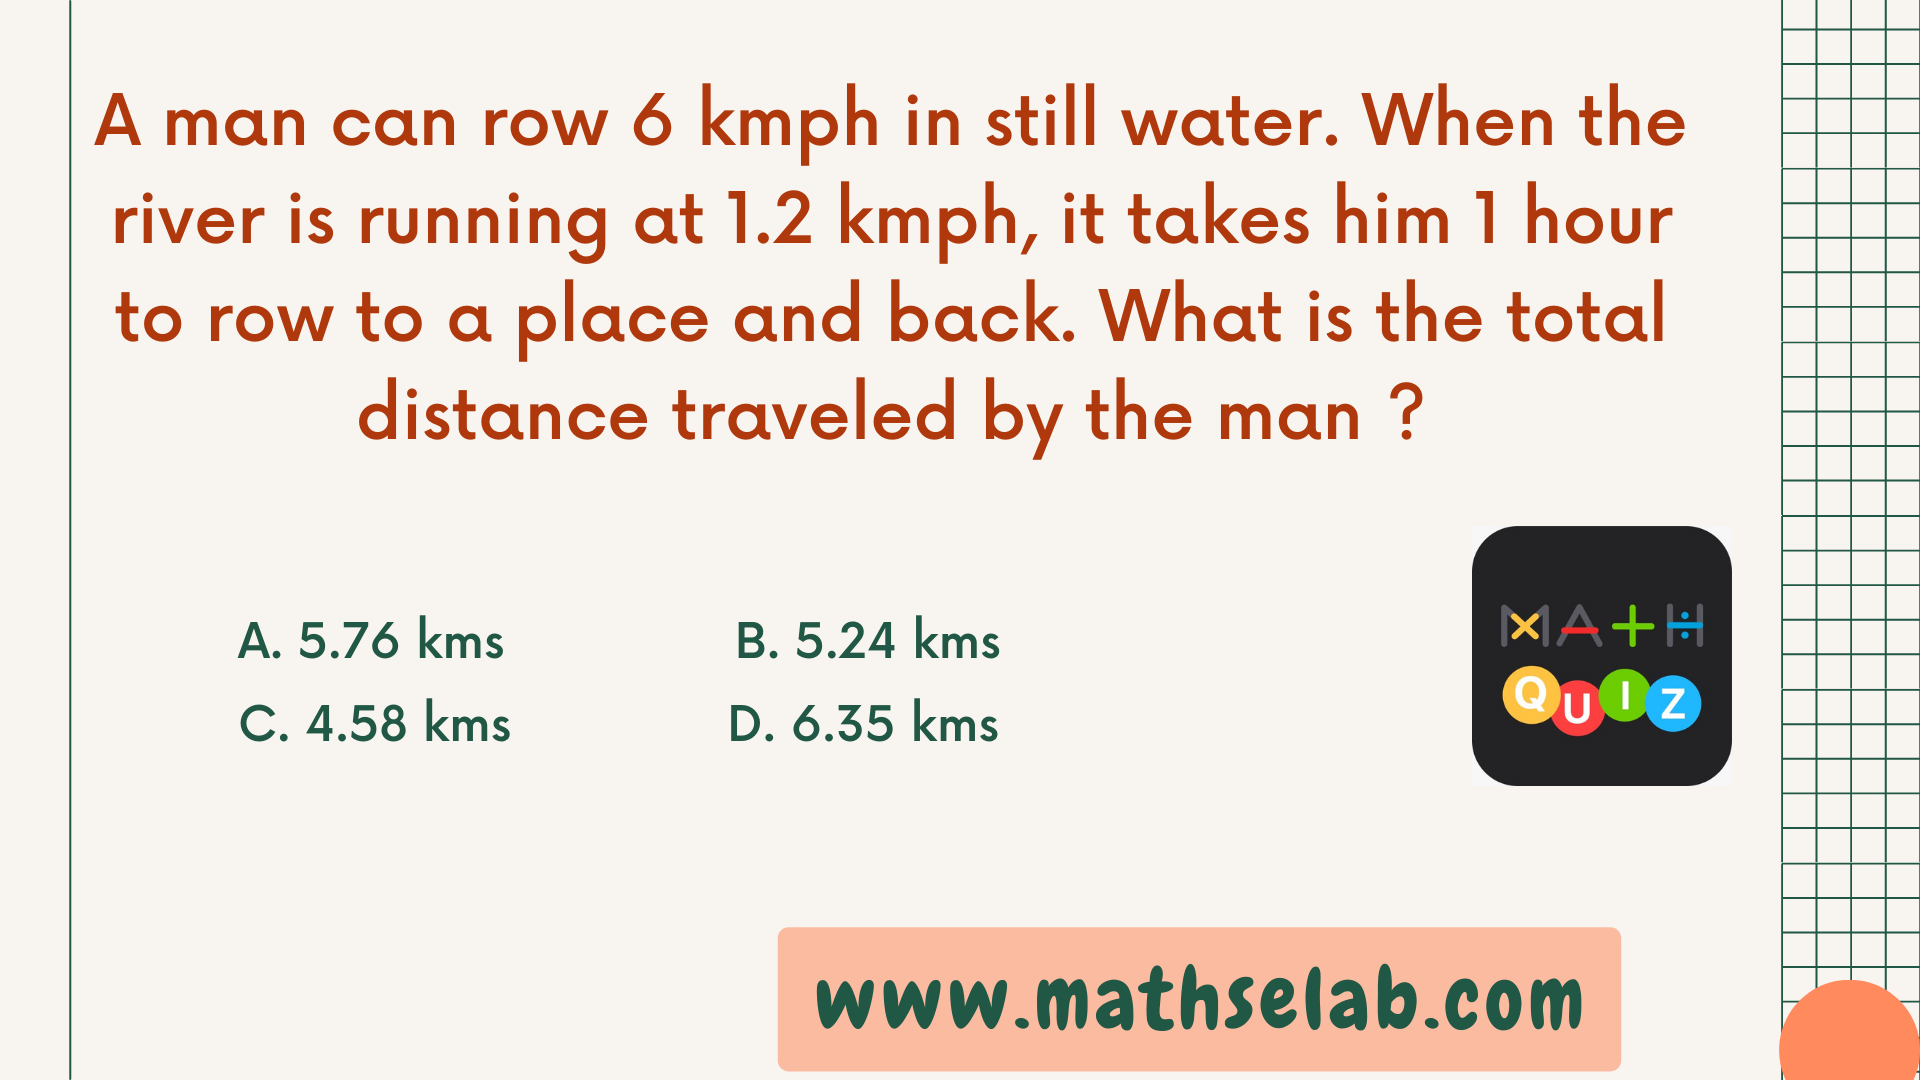 A man can row 6 kmph in still water. When the river is running at 1.2 kmph, it takes him 1 hour to row to a place and back. What is the total distance traveled by the man ?